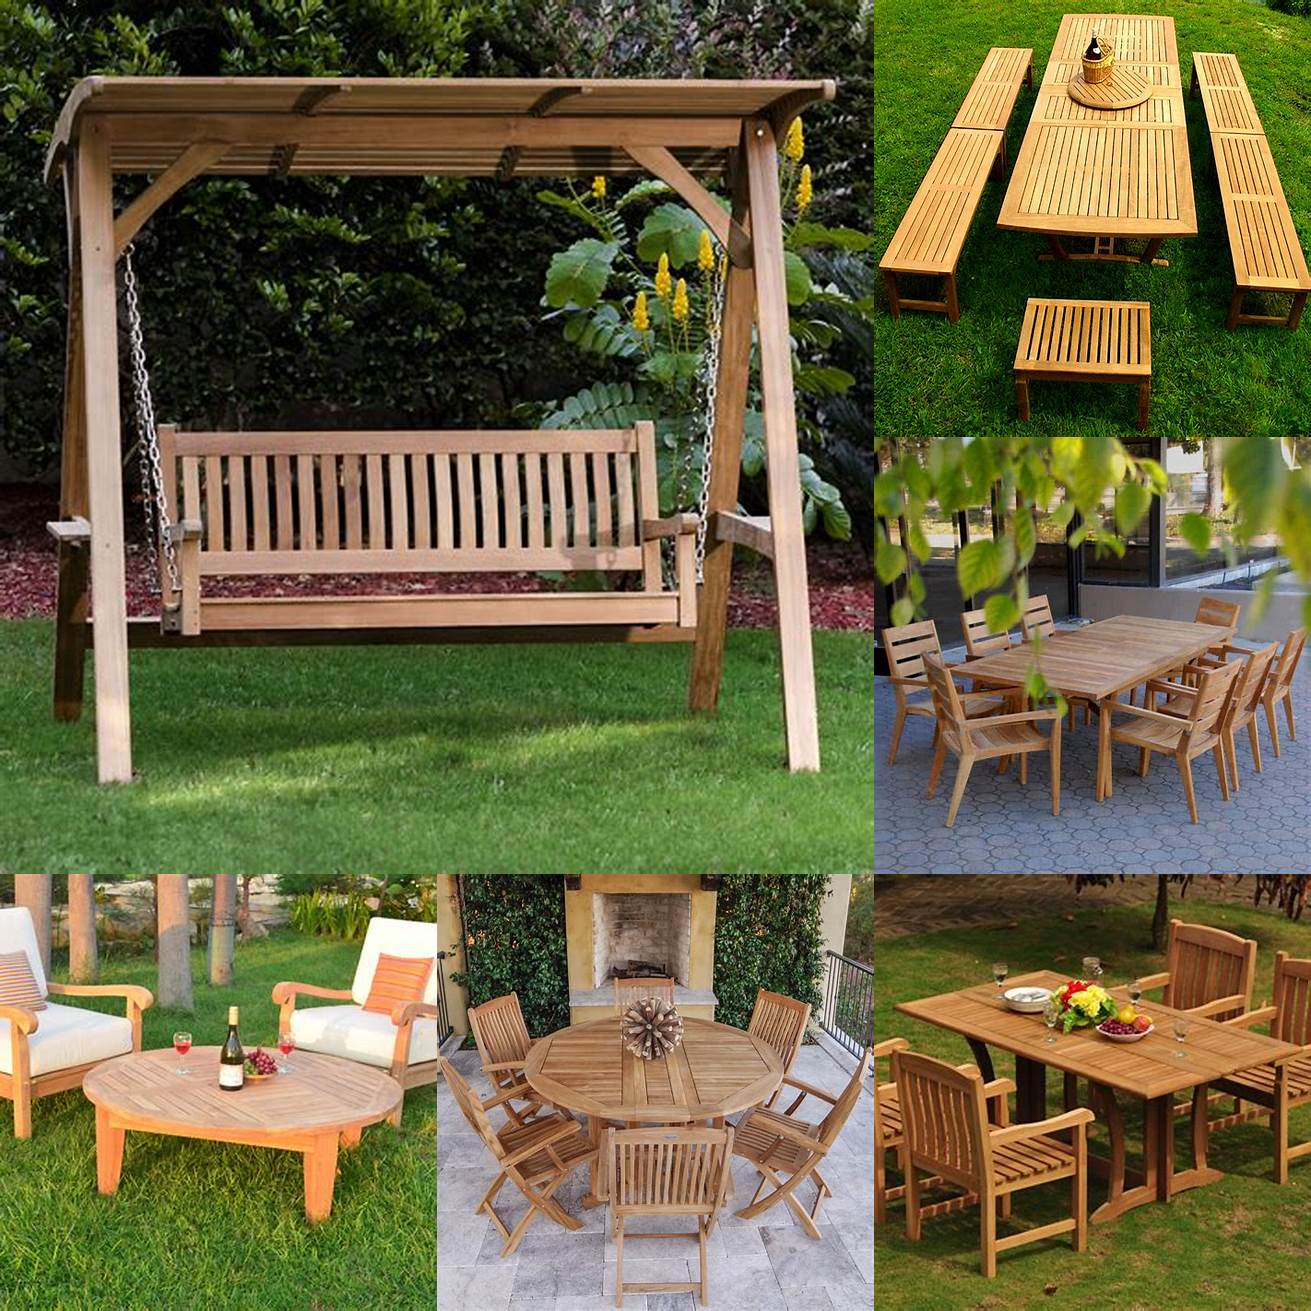 Teak Picnic Table with a Swing Set